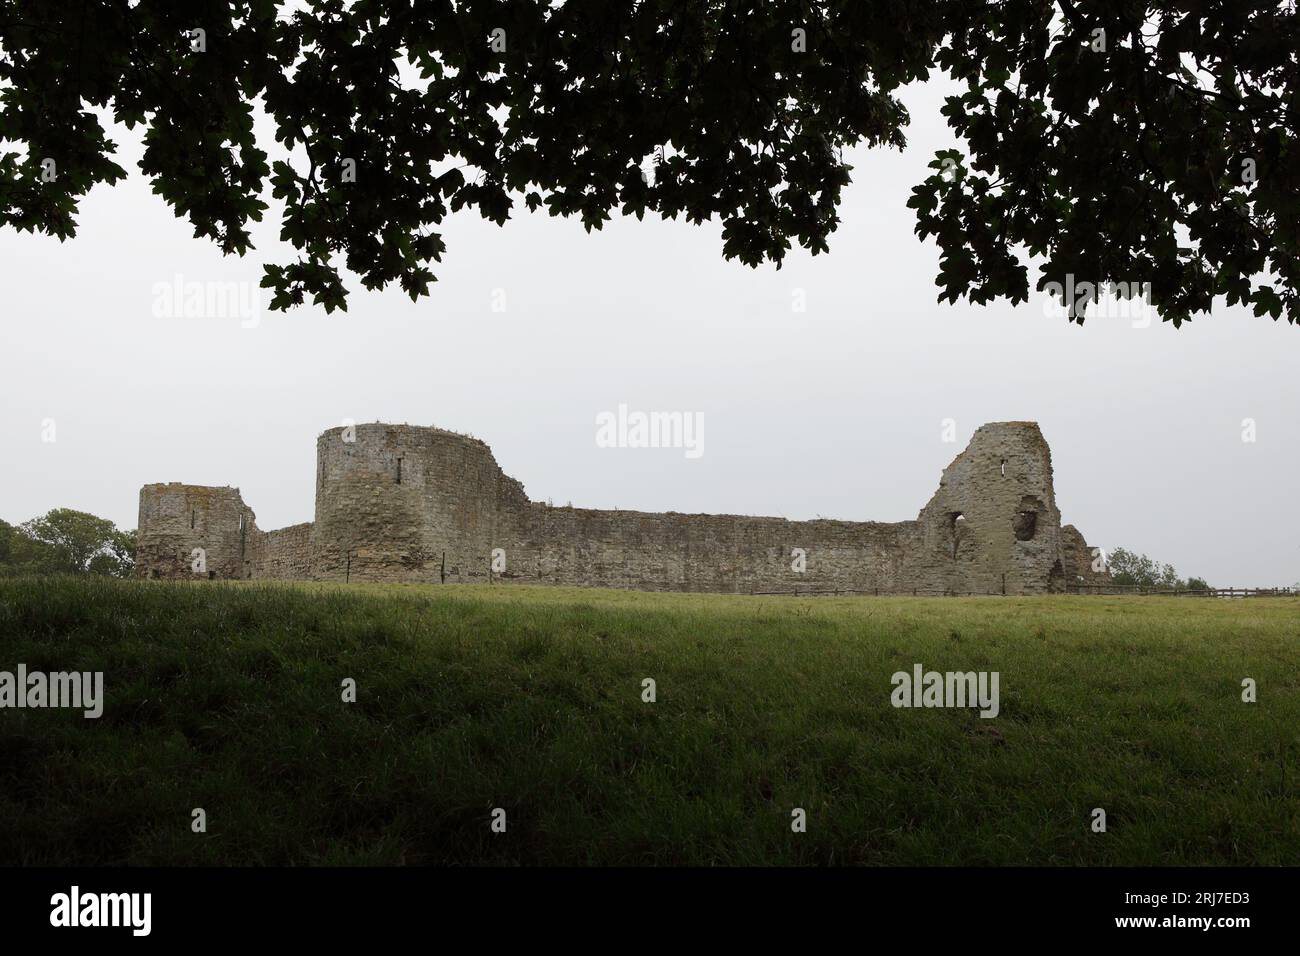 Pevensey Castle is situated not too far from Pevensey Bay where William of Normandy first landed during the Conquest of England in 1066. Stock Photo